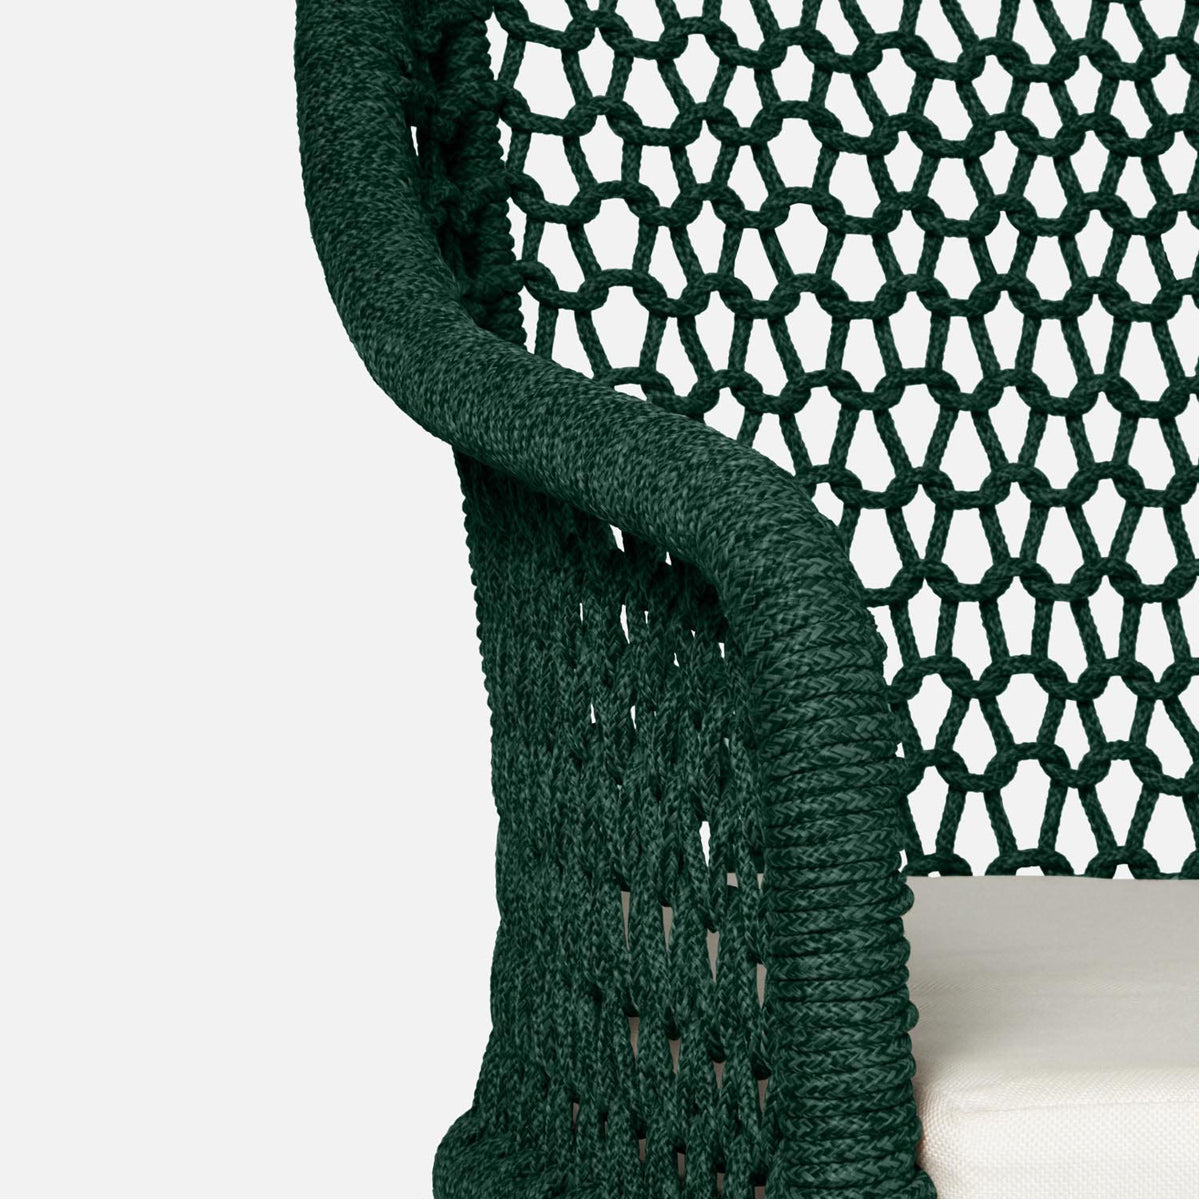 Made Goods Chadwick Woven Rope Outdoor Arm Chair in Volta Fabric